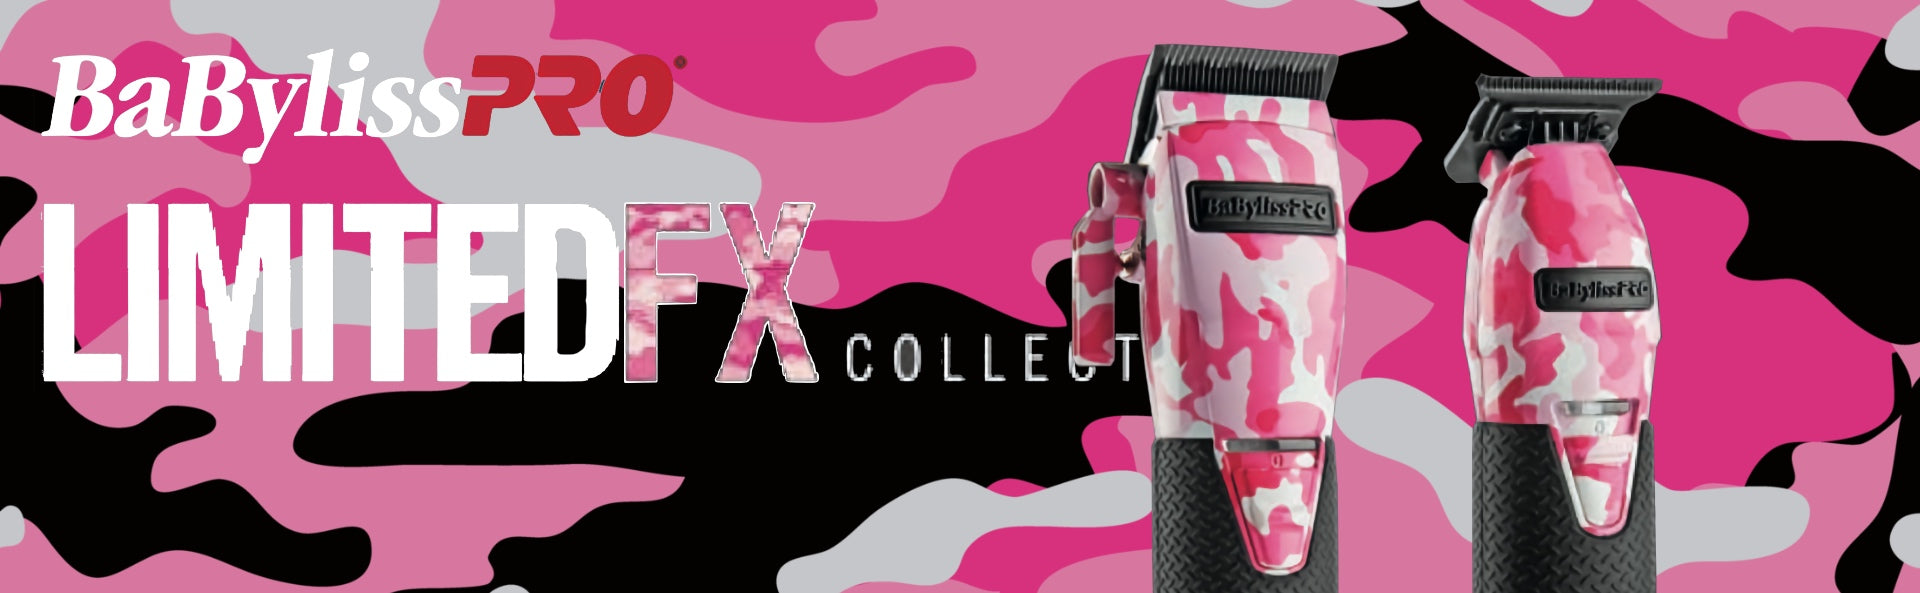 BaBylissPRO LimitedFX Collection Pink Camo Metal Lithium Clipper and Trimmer Set